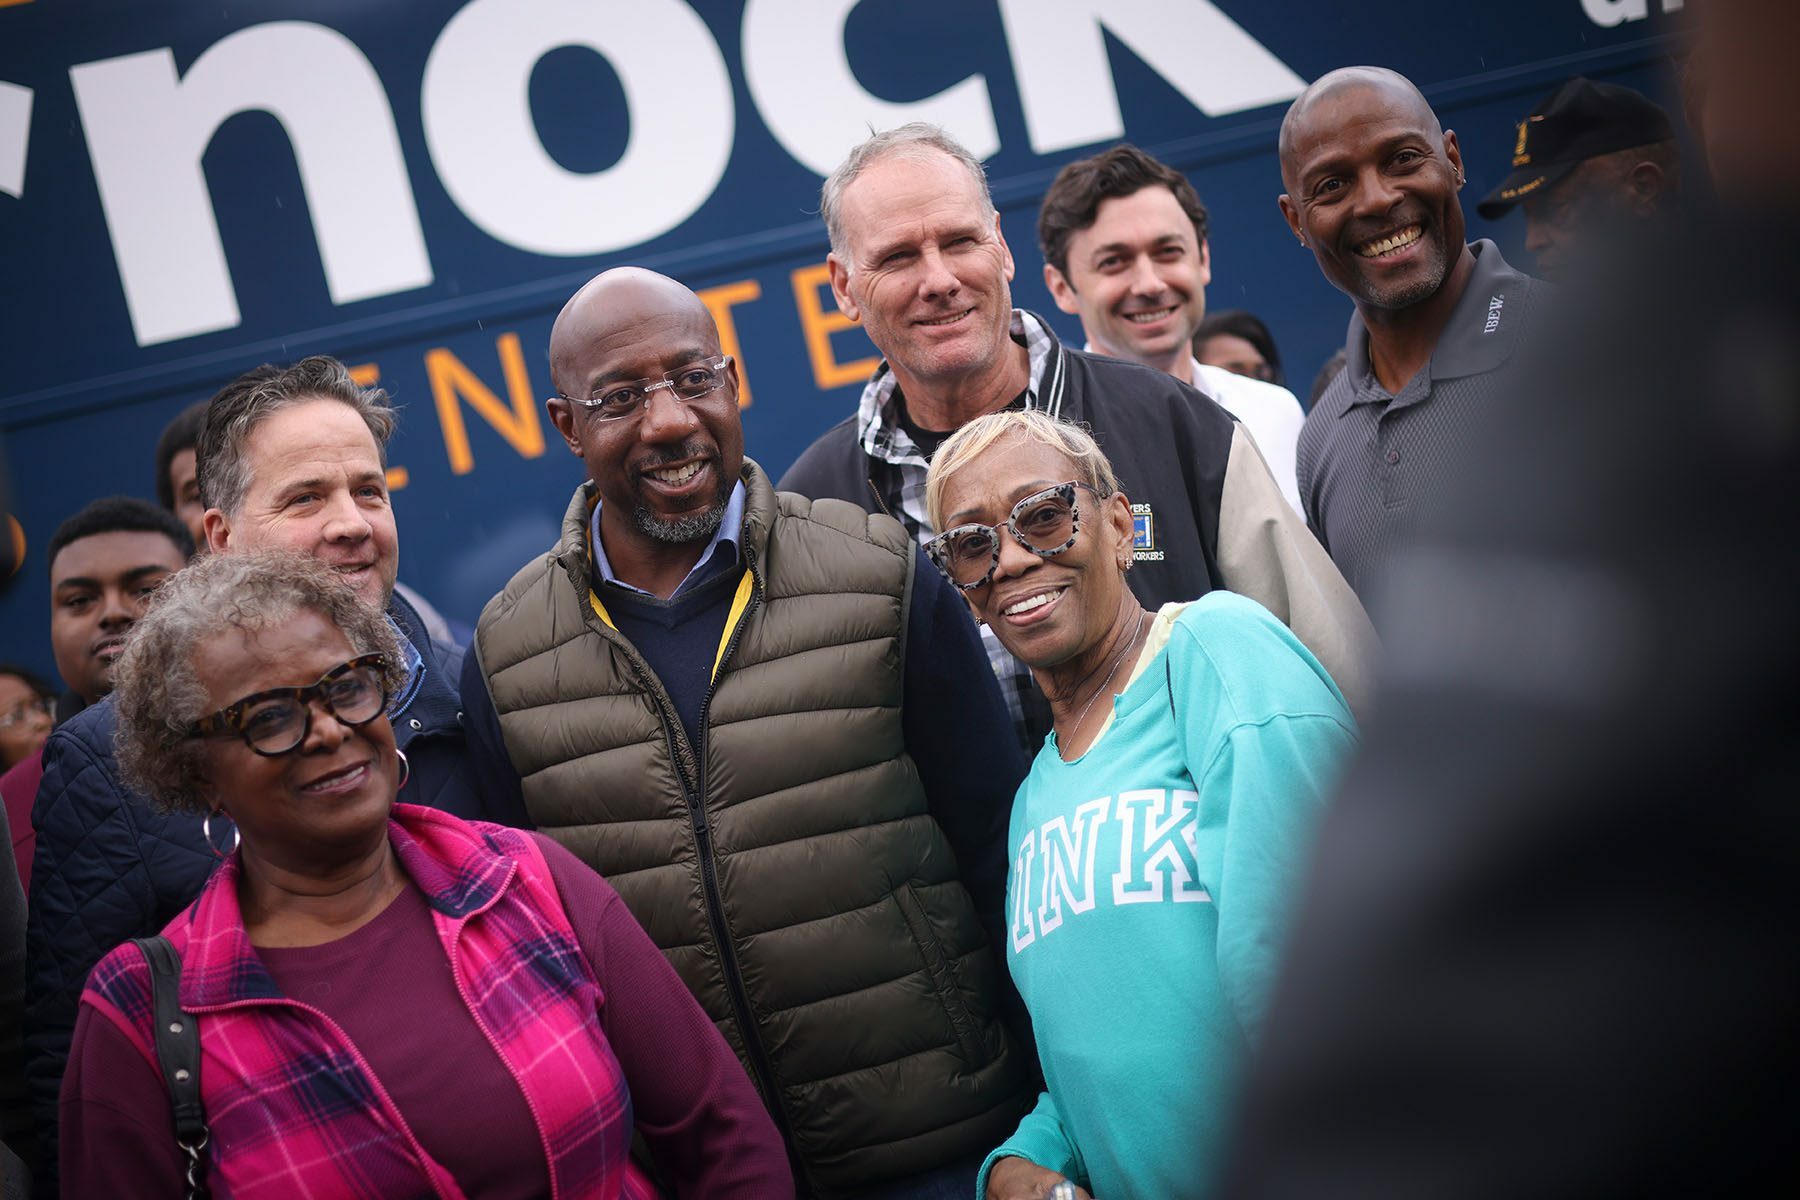 Sen. Raphael Warnock takes photos with supporters after a Get Out the Vote rally.